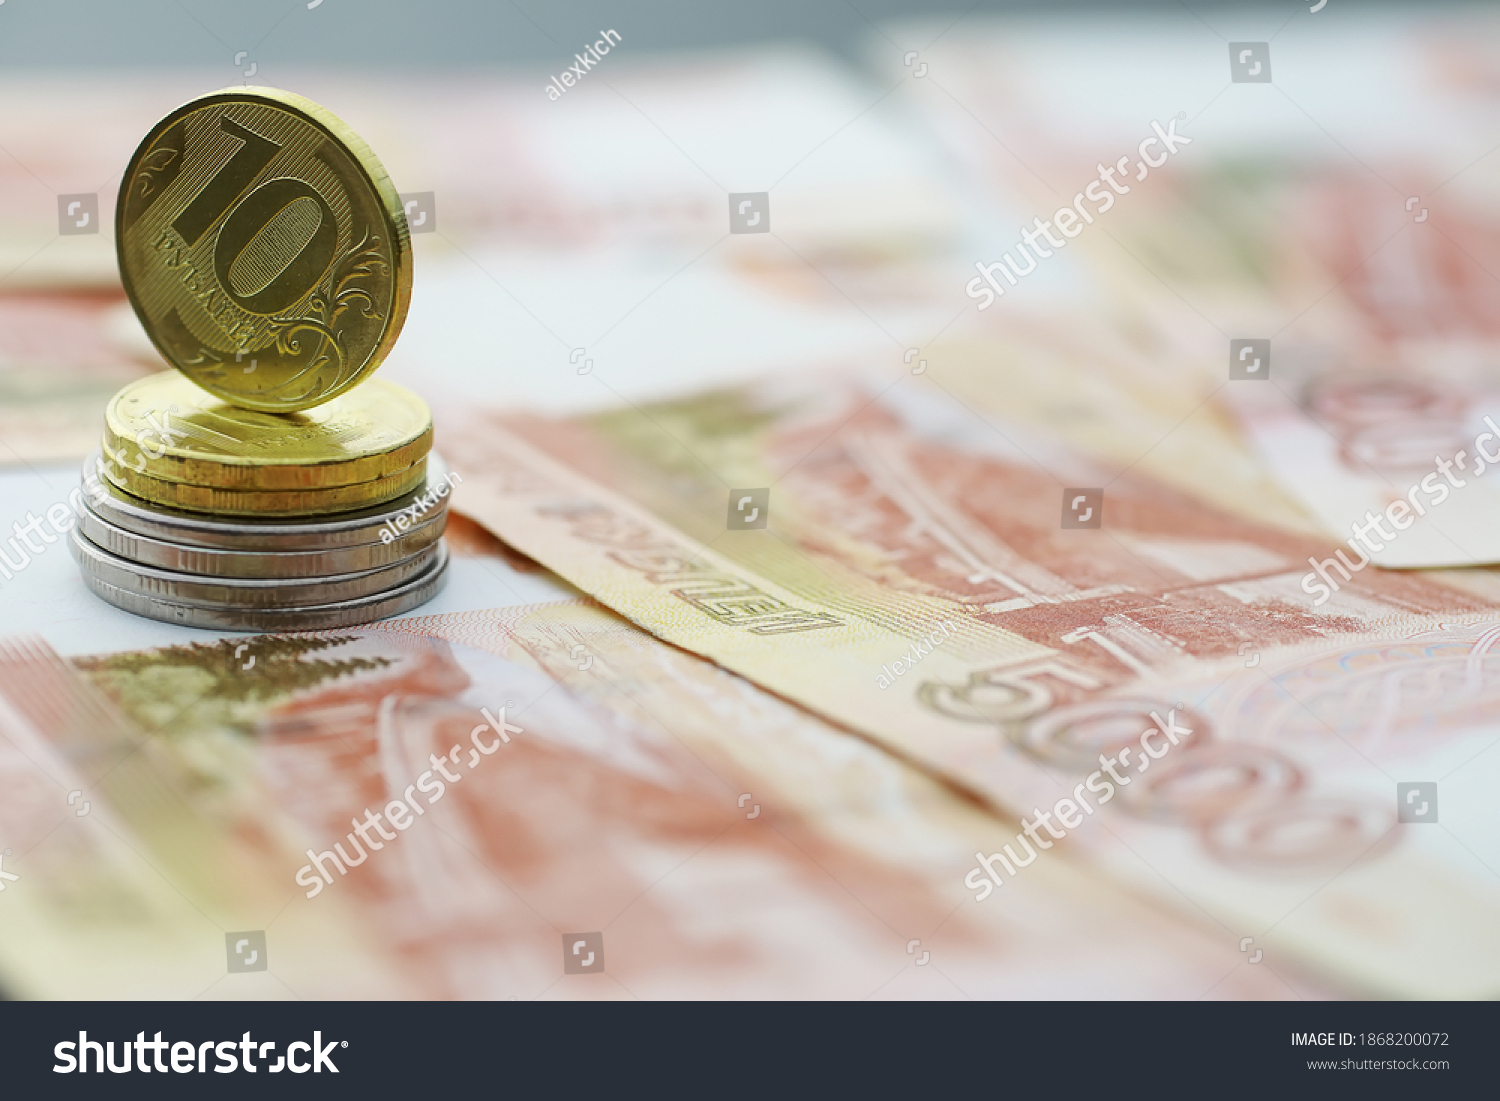 Russian banknotes and coins "rubles." Banknote with inscription "five thousand rubles" and coins of 5 and 10 rubles. Background made of money. #1868200072